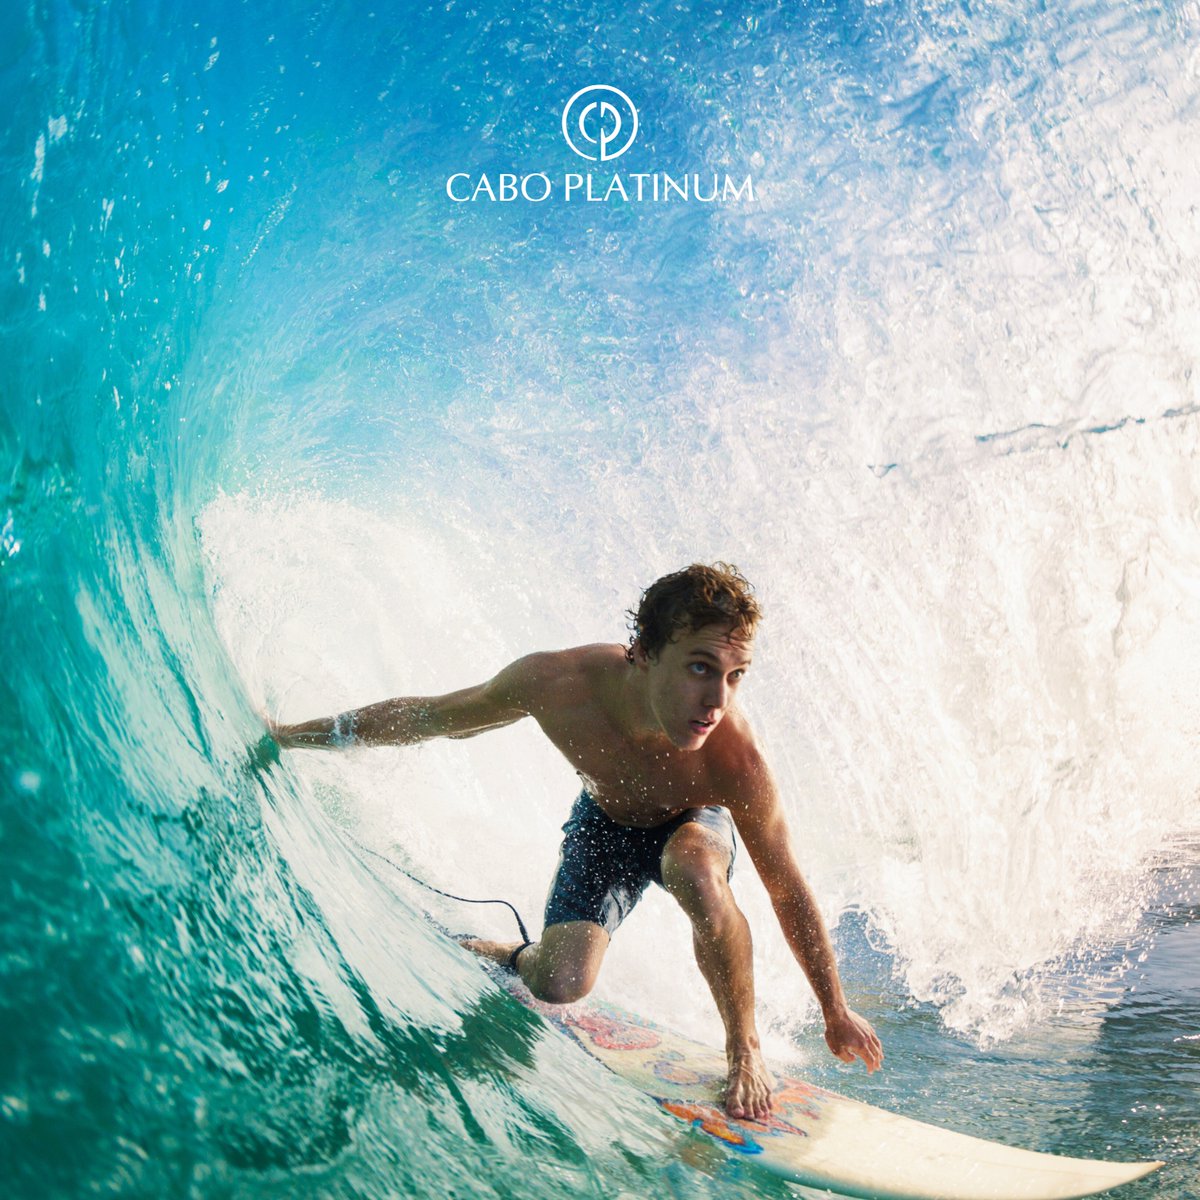 Los Cabos, Mexico, is an epic beach destination! Don't hesitate to ask your Concierge for assistance in arranging exhilarating surf lessons.

Book your dream vacation: caboplatinum.com

#caboplatinum #luxuryvillarentals #wateractivities #surfing #concierge